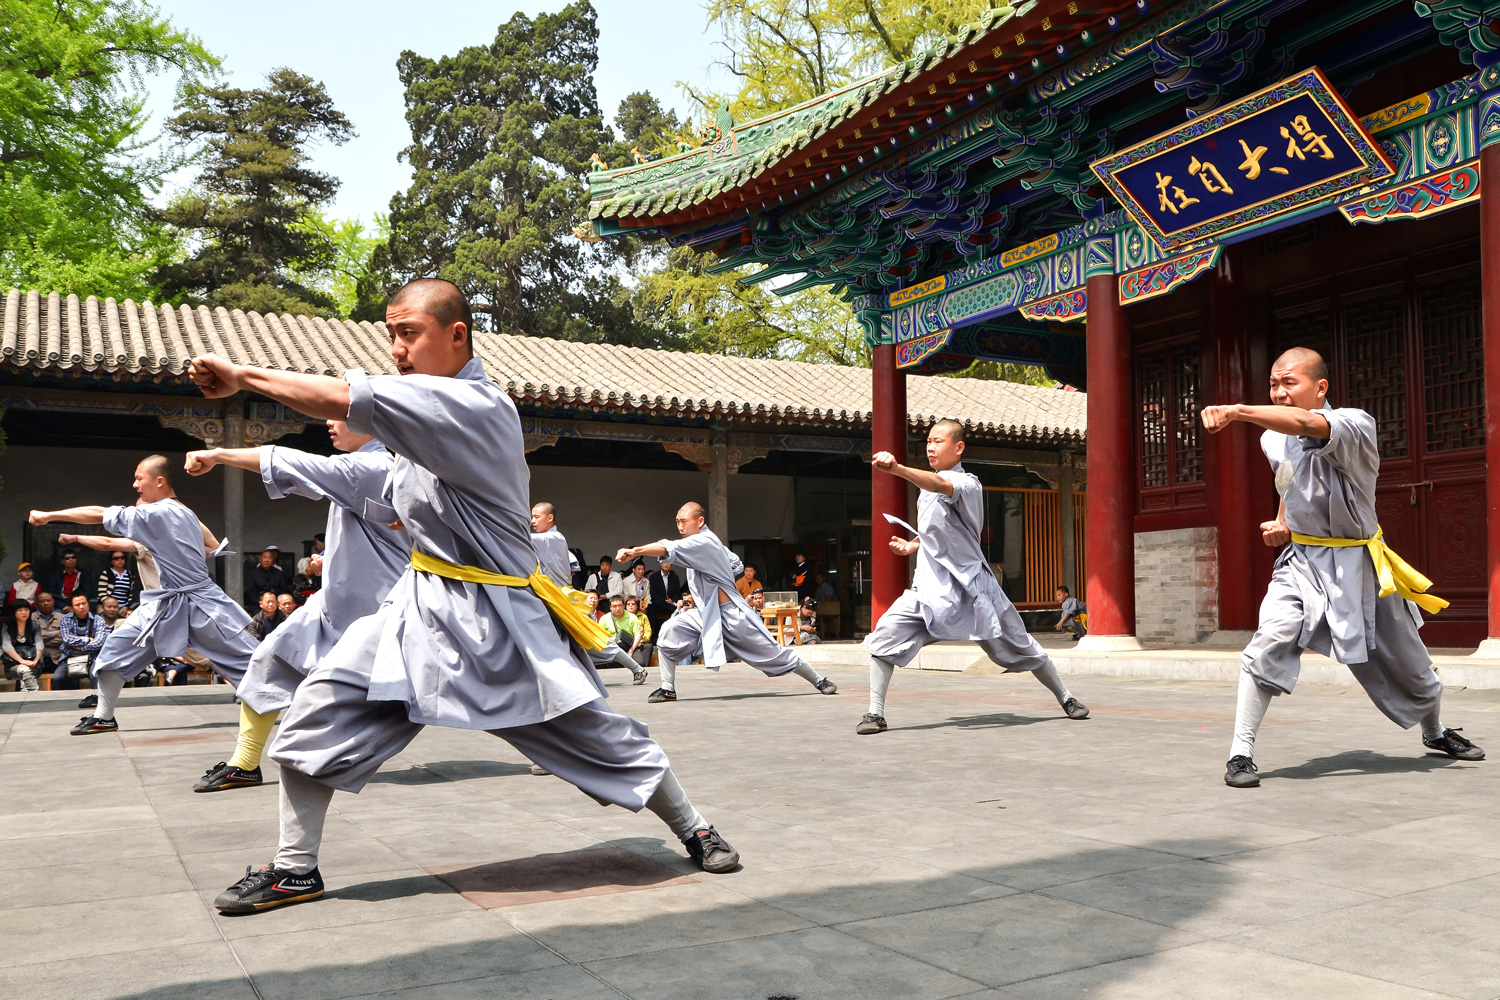 Chinese Martial Art: Kung Fu | Asian Inspirations